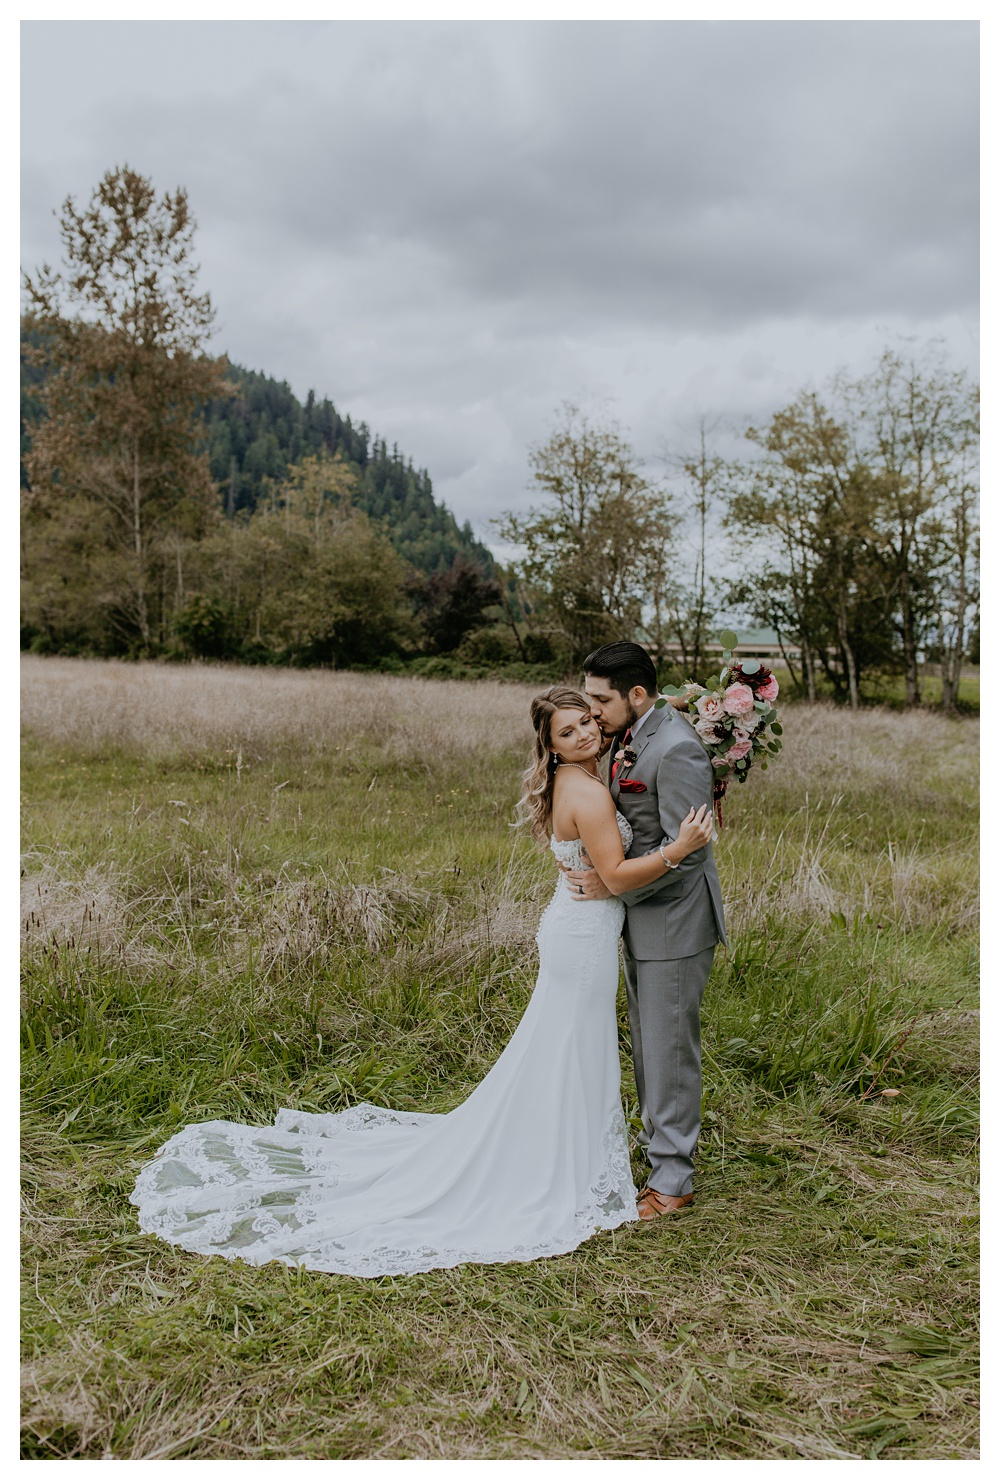 Javier and Roxanne during portraits out in the field at Mount Peak Farm in Washington State. Washington State Wedding Photographer, Mount Peak Wedding Venue, PNW Wedding Photographer